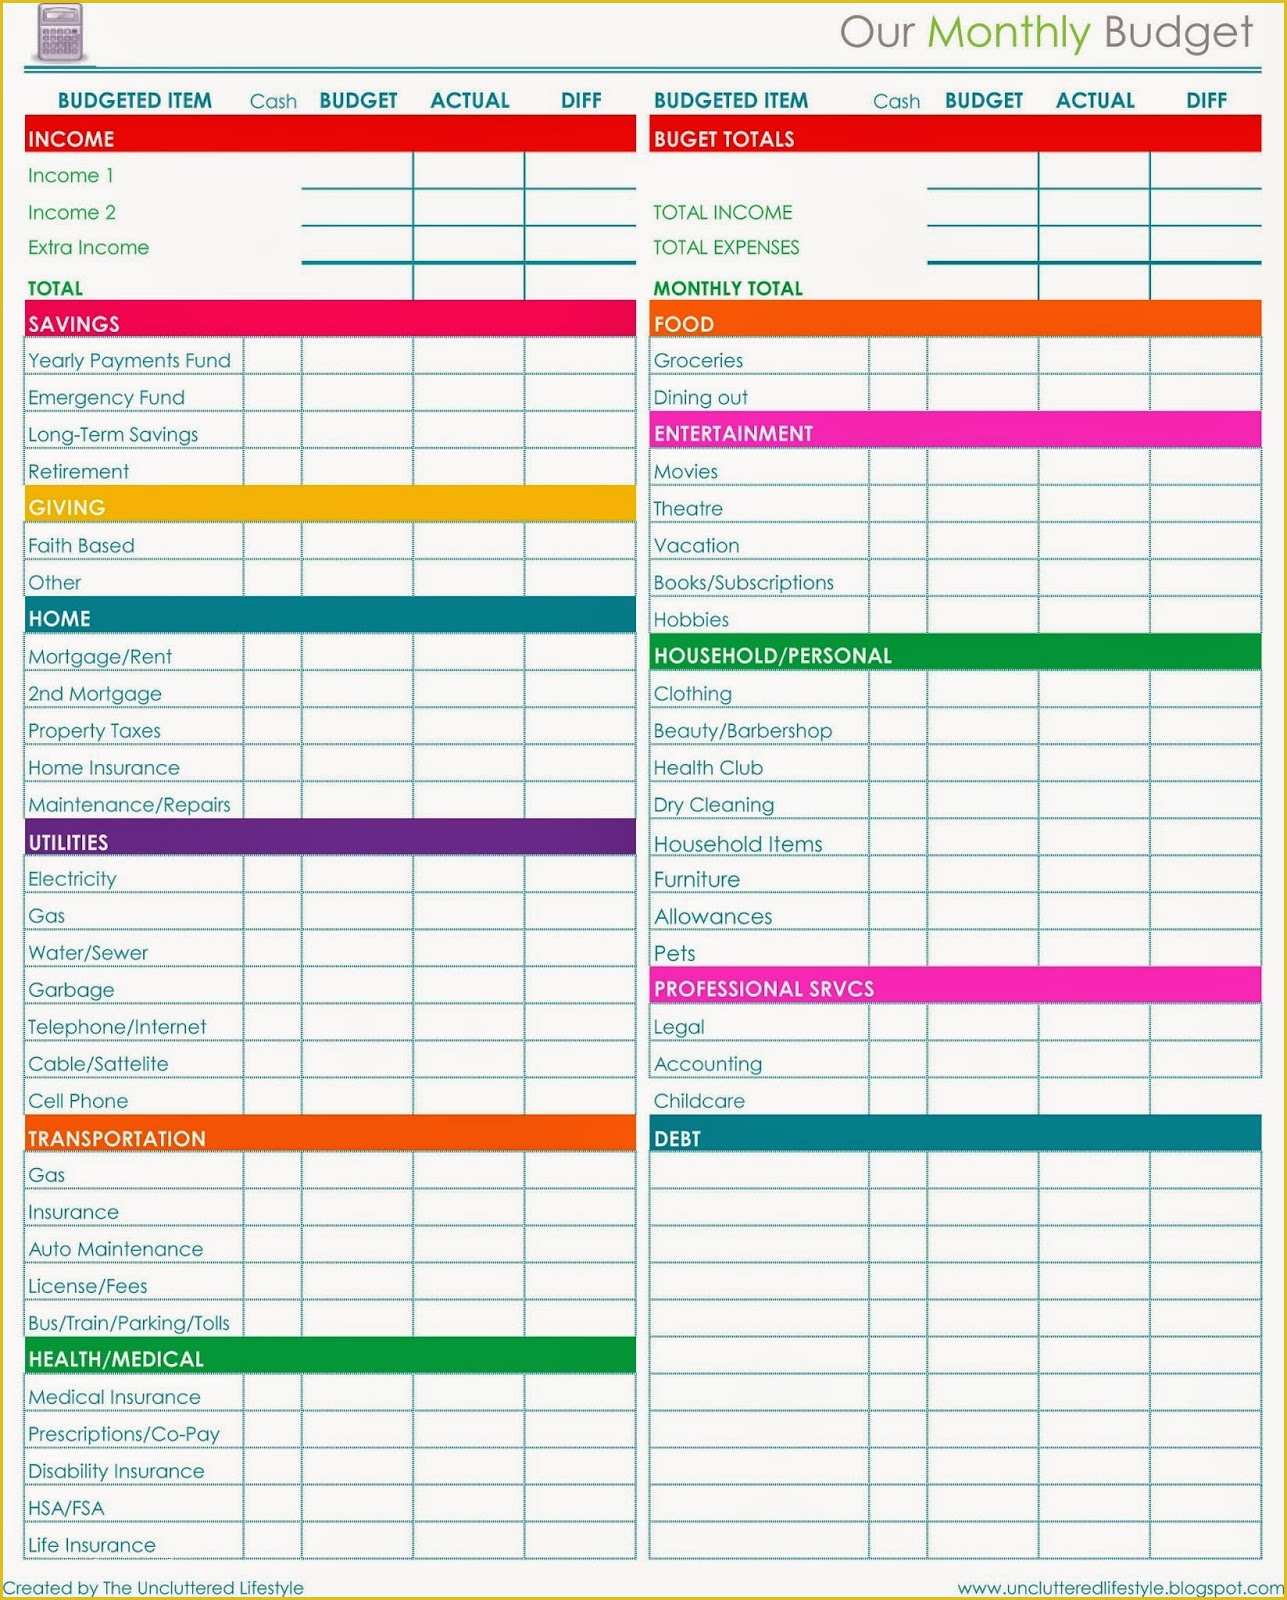 Free Printable Weekly Budget Template Of 2015 Planner More Free Printables Find Lifestyle